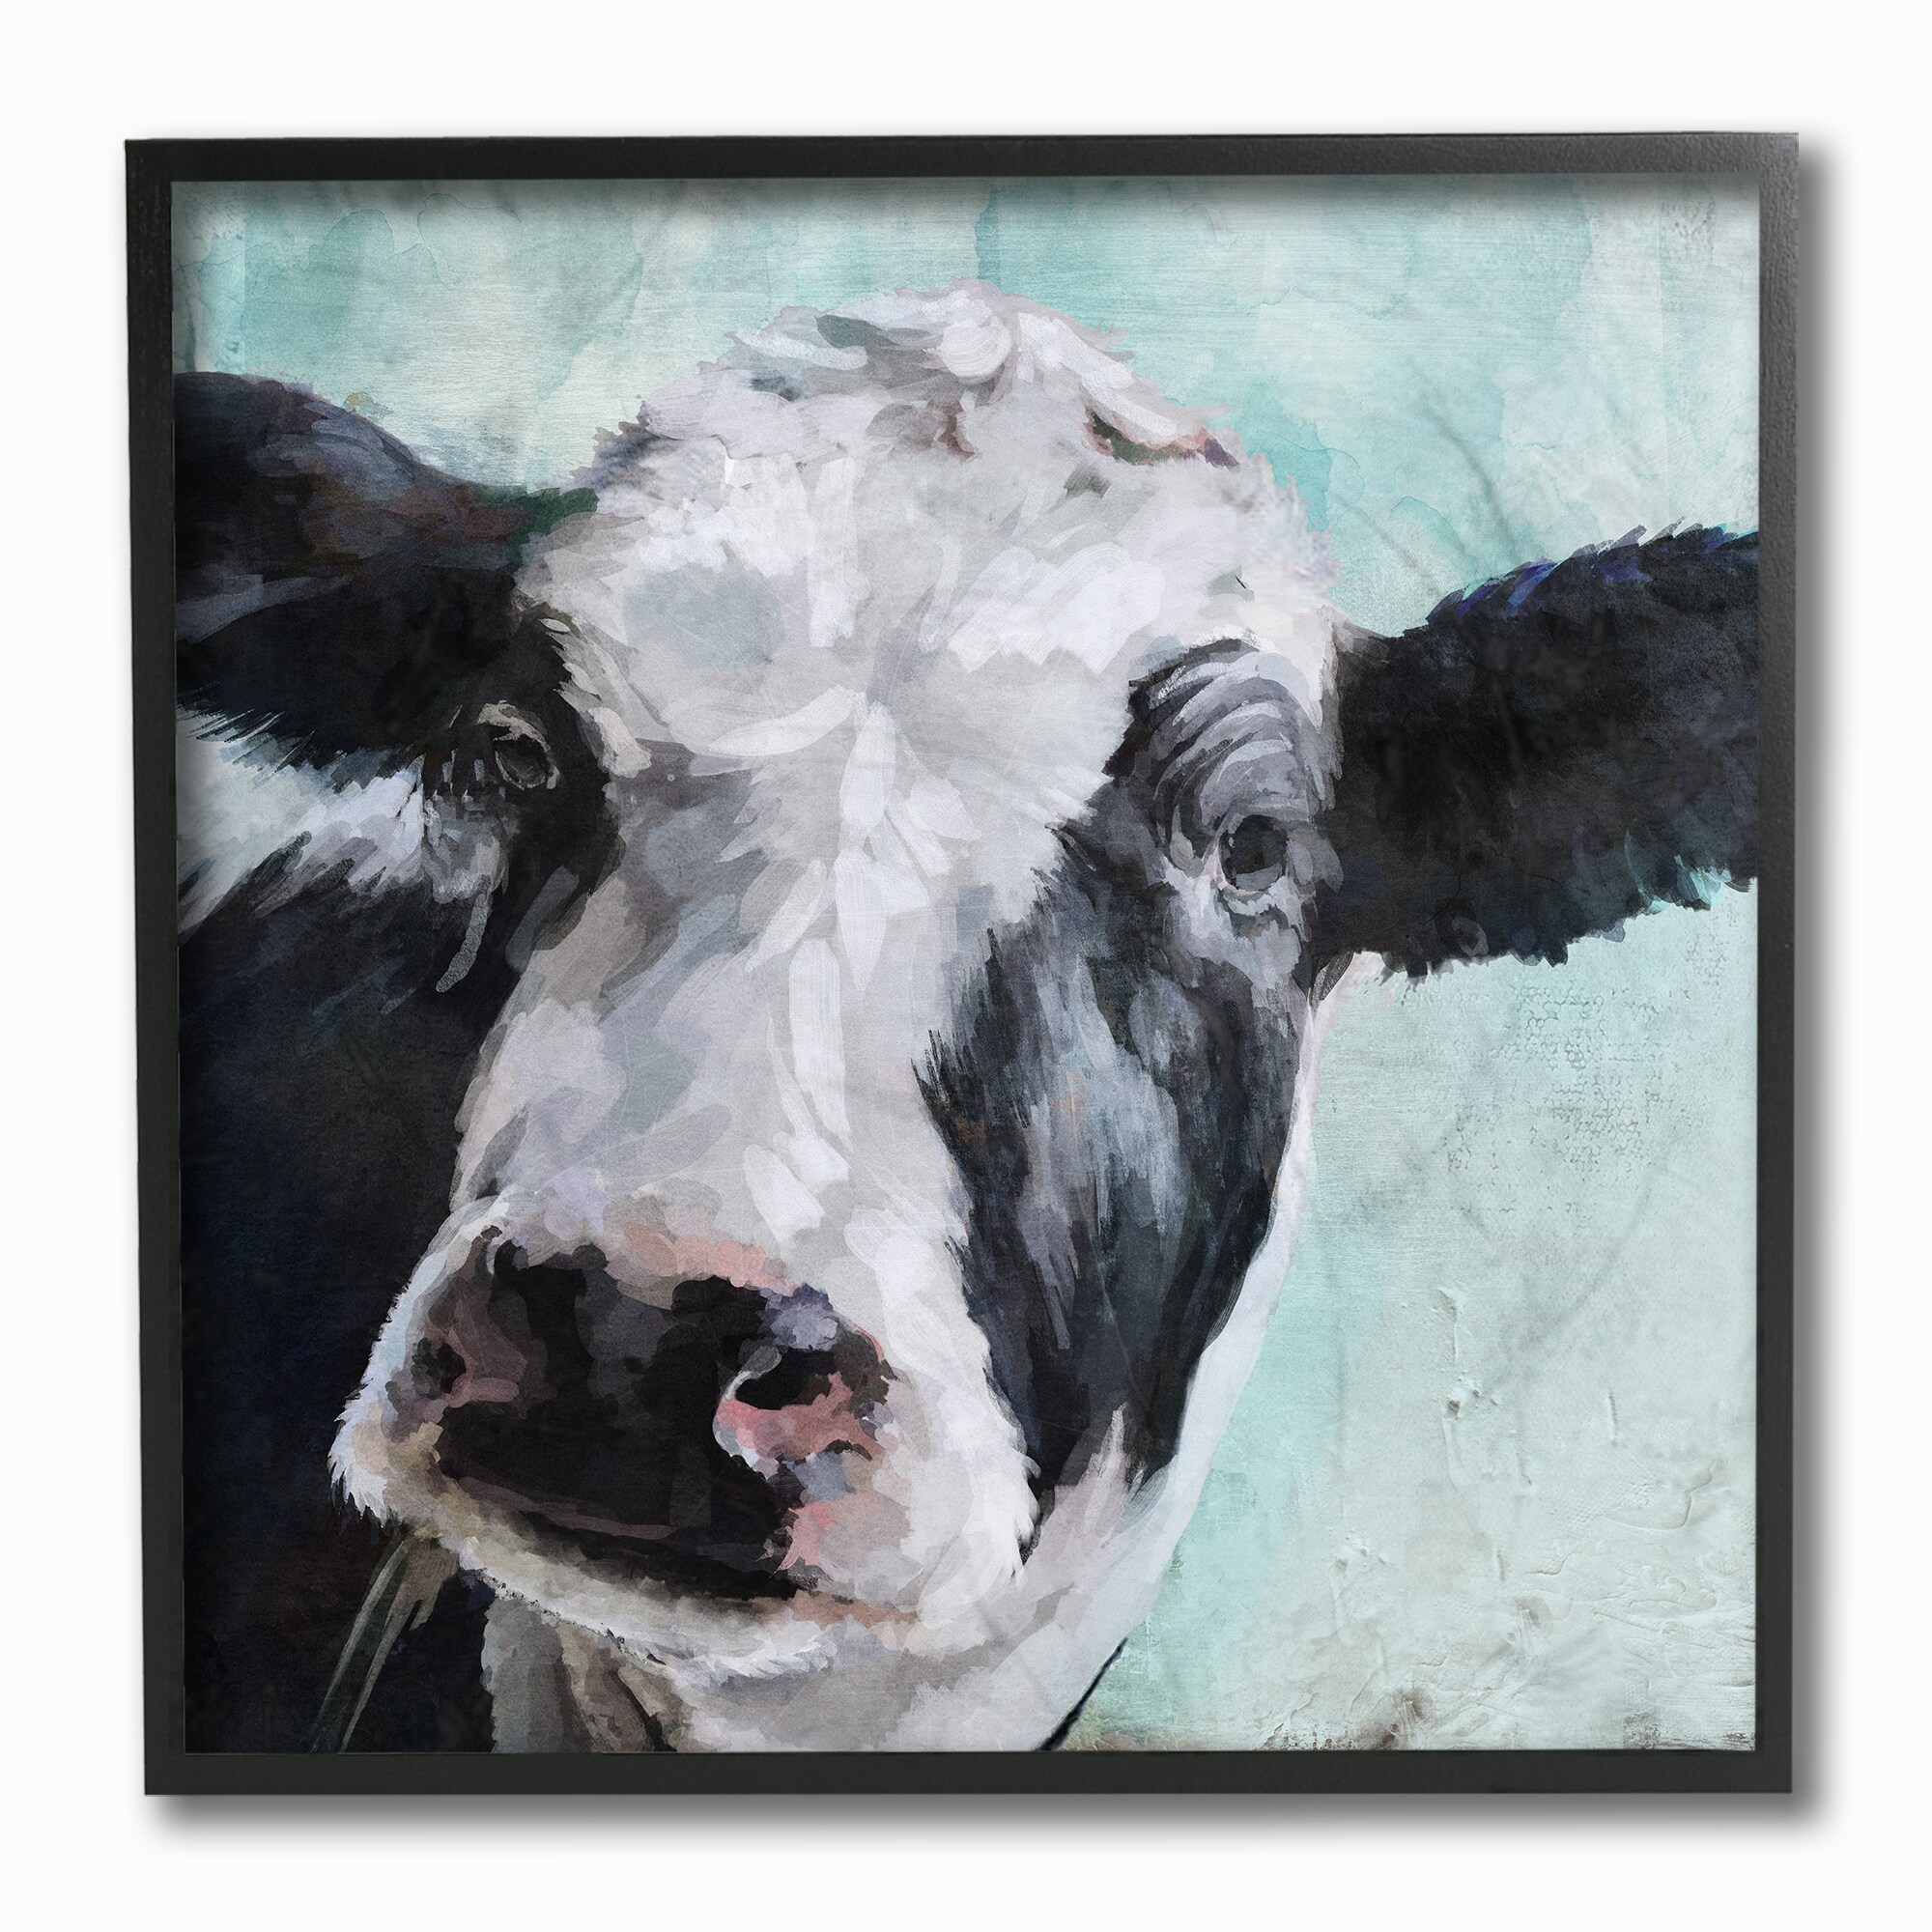 12 x 12 Stupell Industries Washed Out Distressed Surface Rustic Cow Portrait Black Framed Wall Art Multi-Color